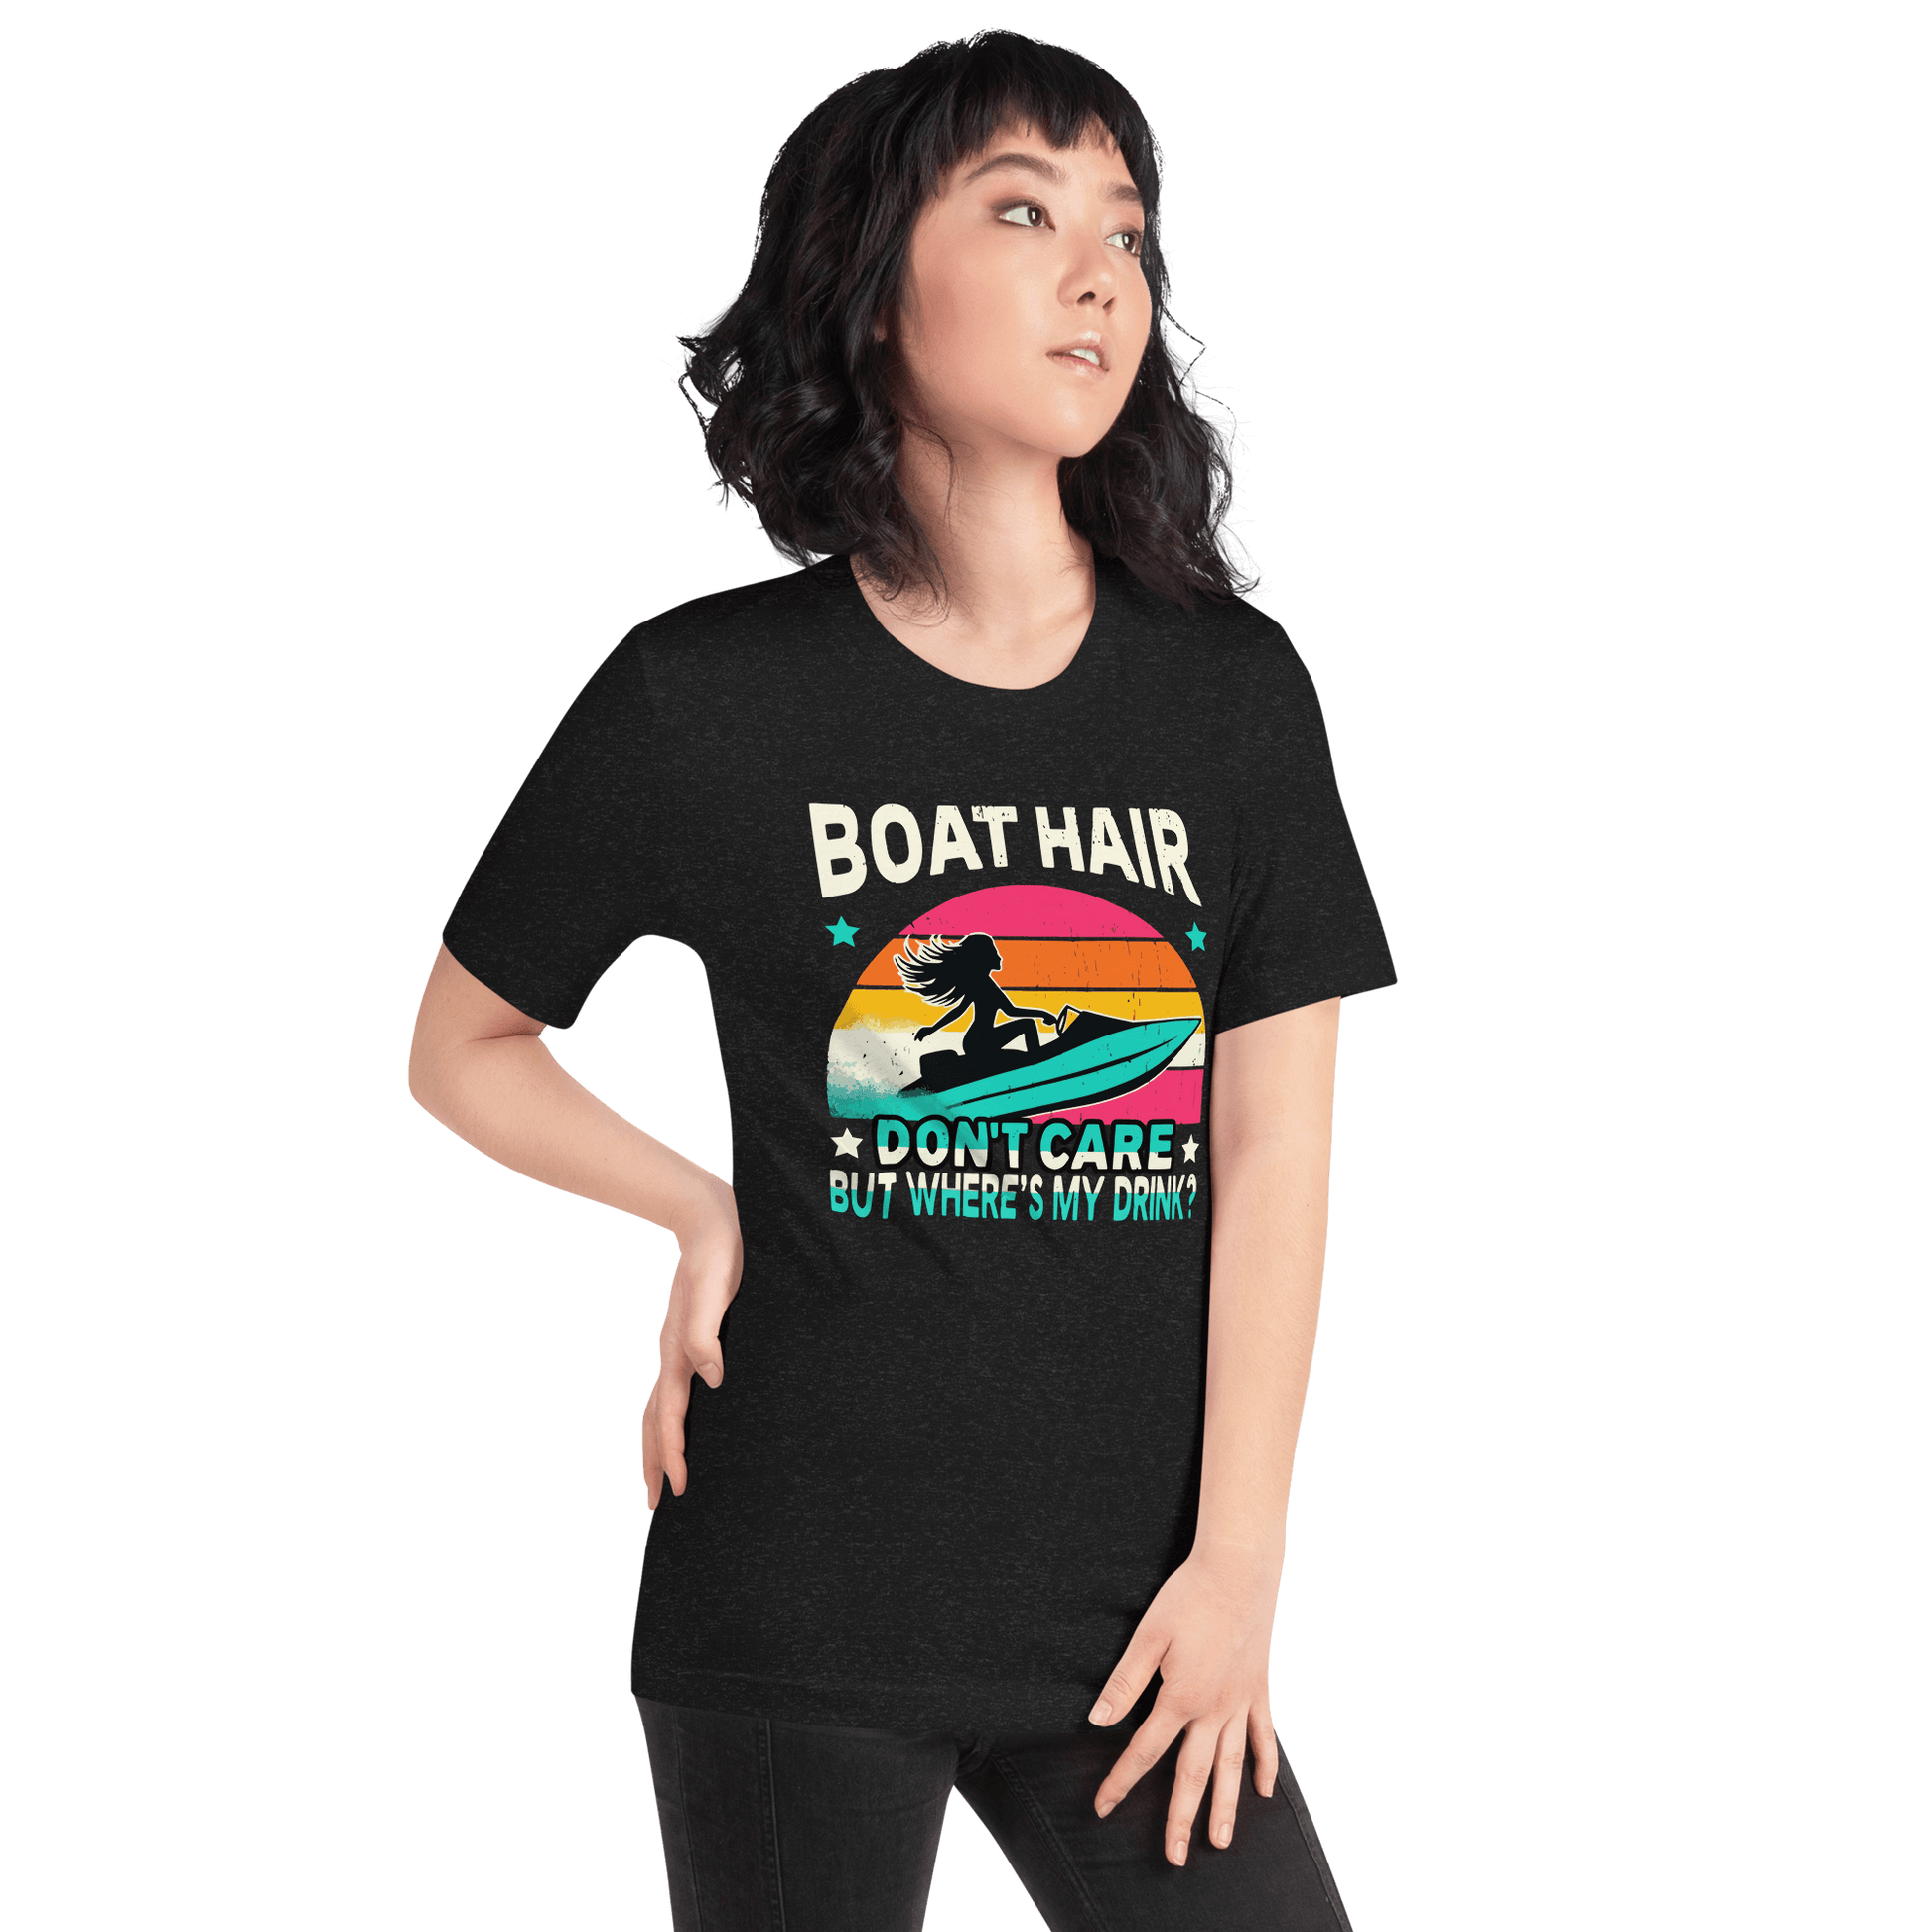 Tee with "Boar Hair Don't Care, But Where's My Drink?" and a woman on a jet ski against a retro sunset backdrop.